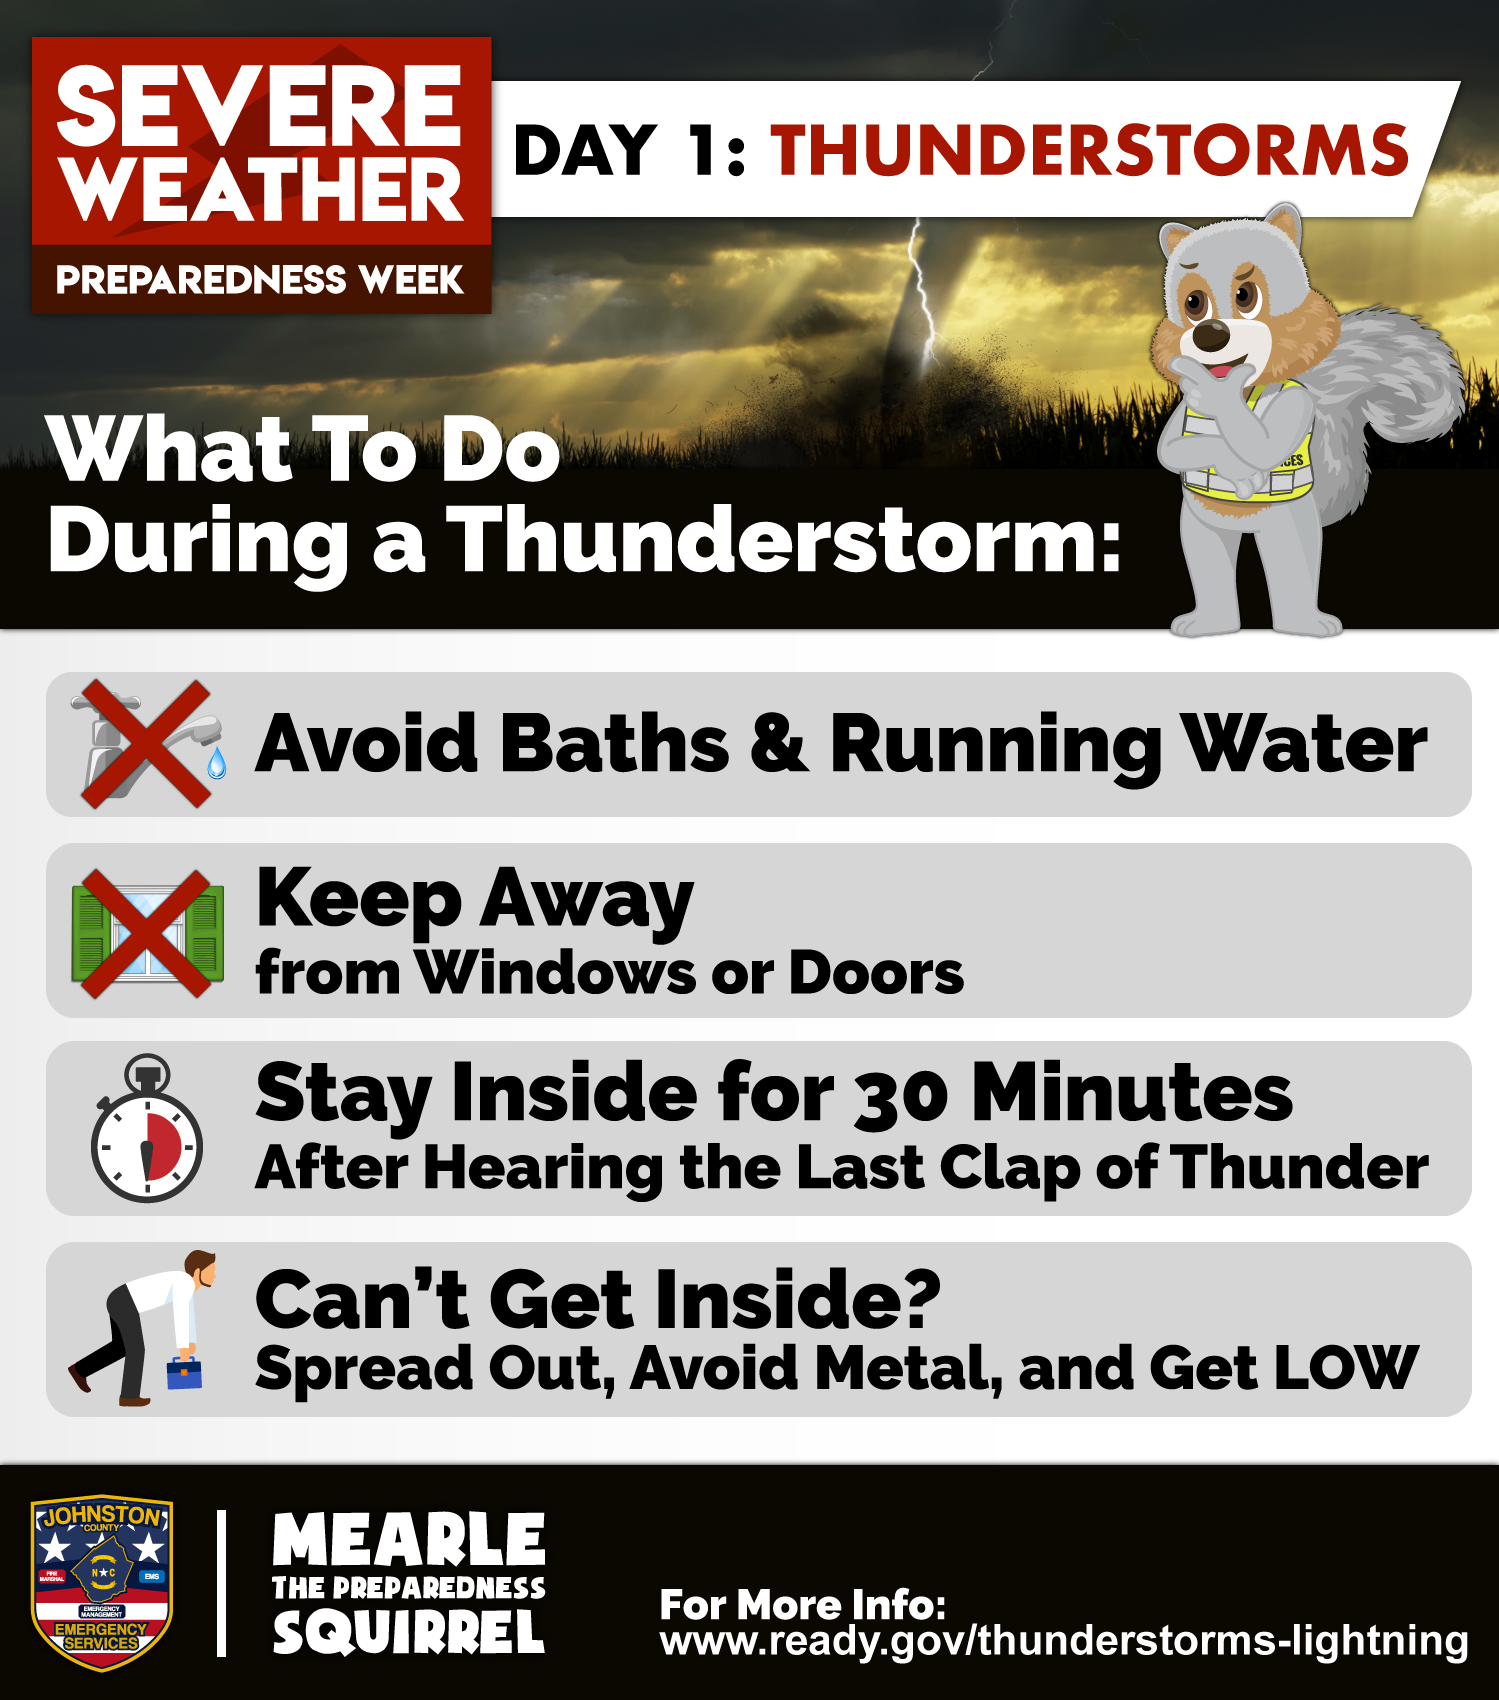 What to do during a thunderstorm: